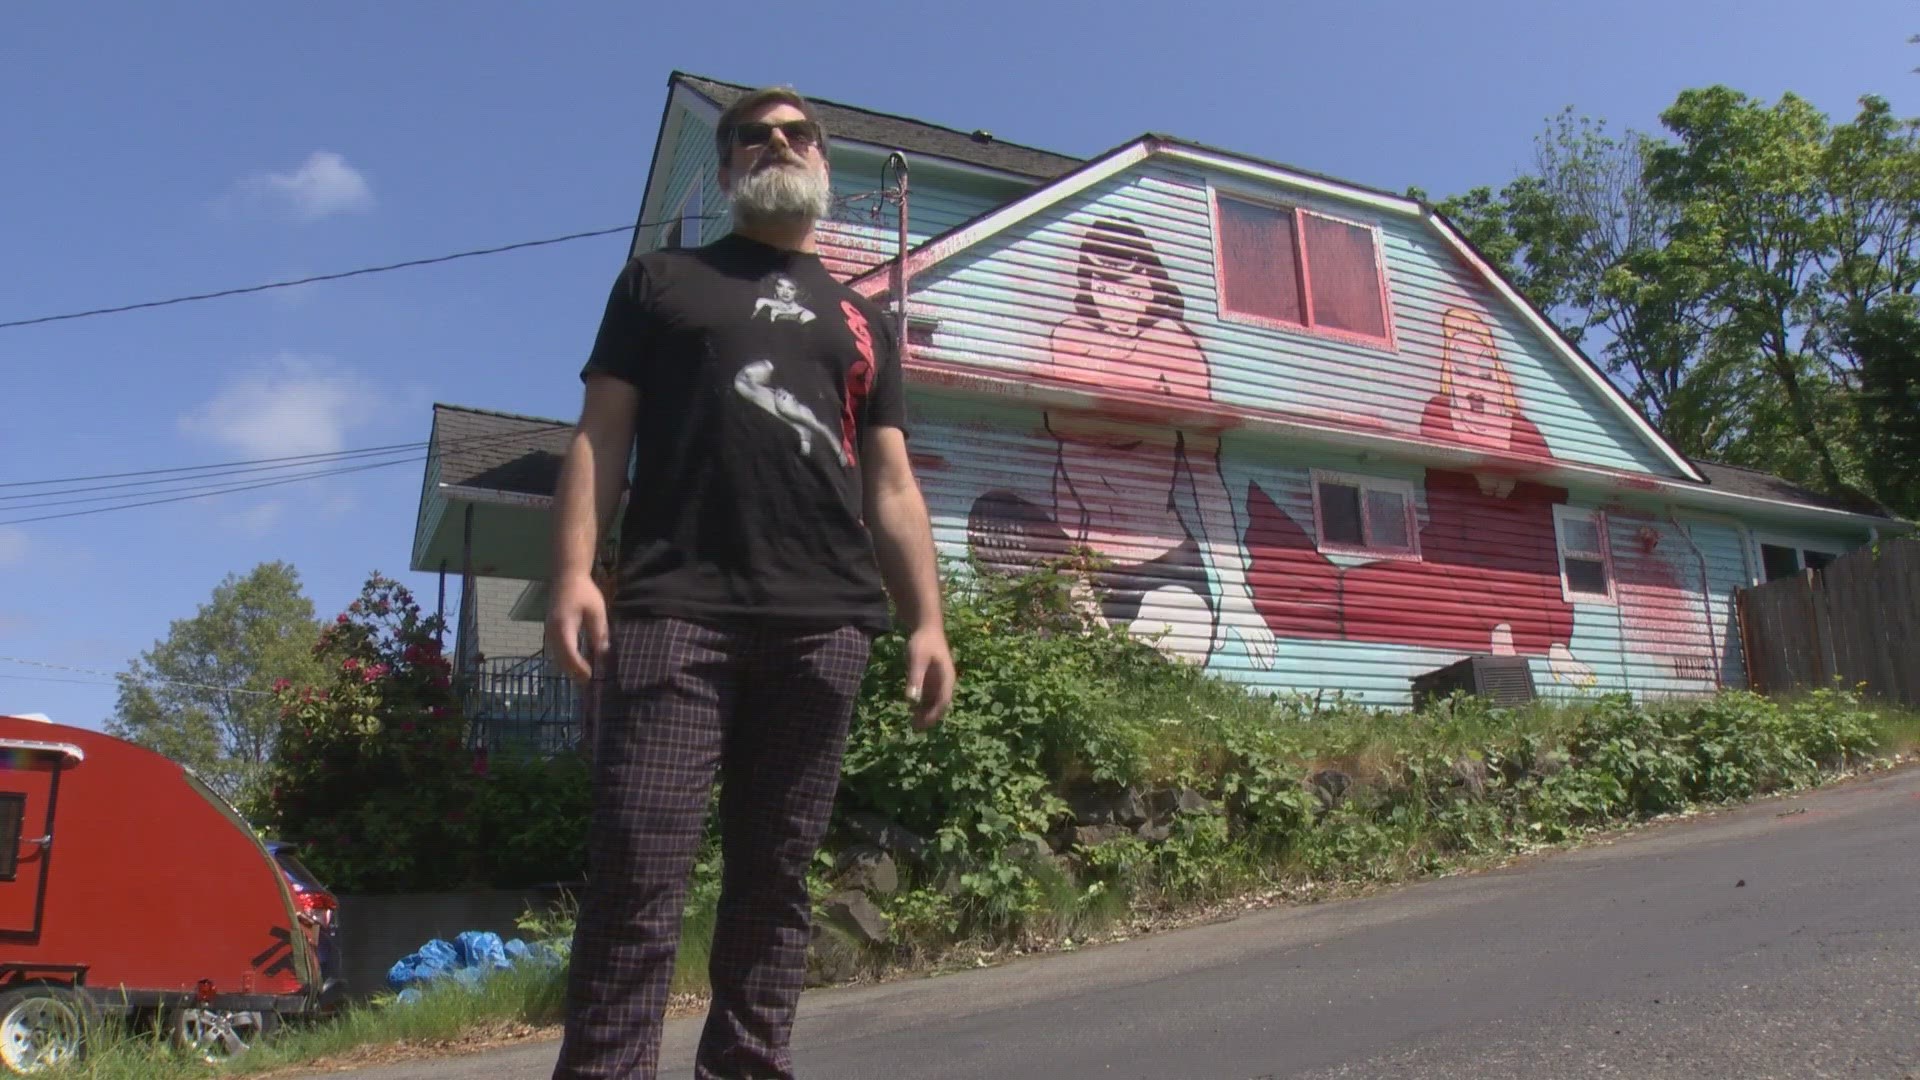 While vandals have targeted the murals before, this time was more extreme. A majority of the house was covered in red paint.